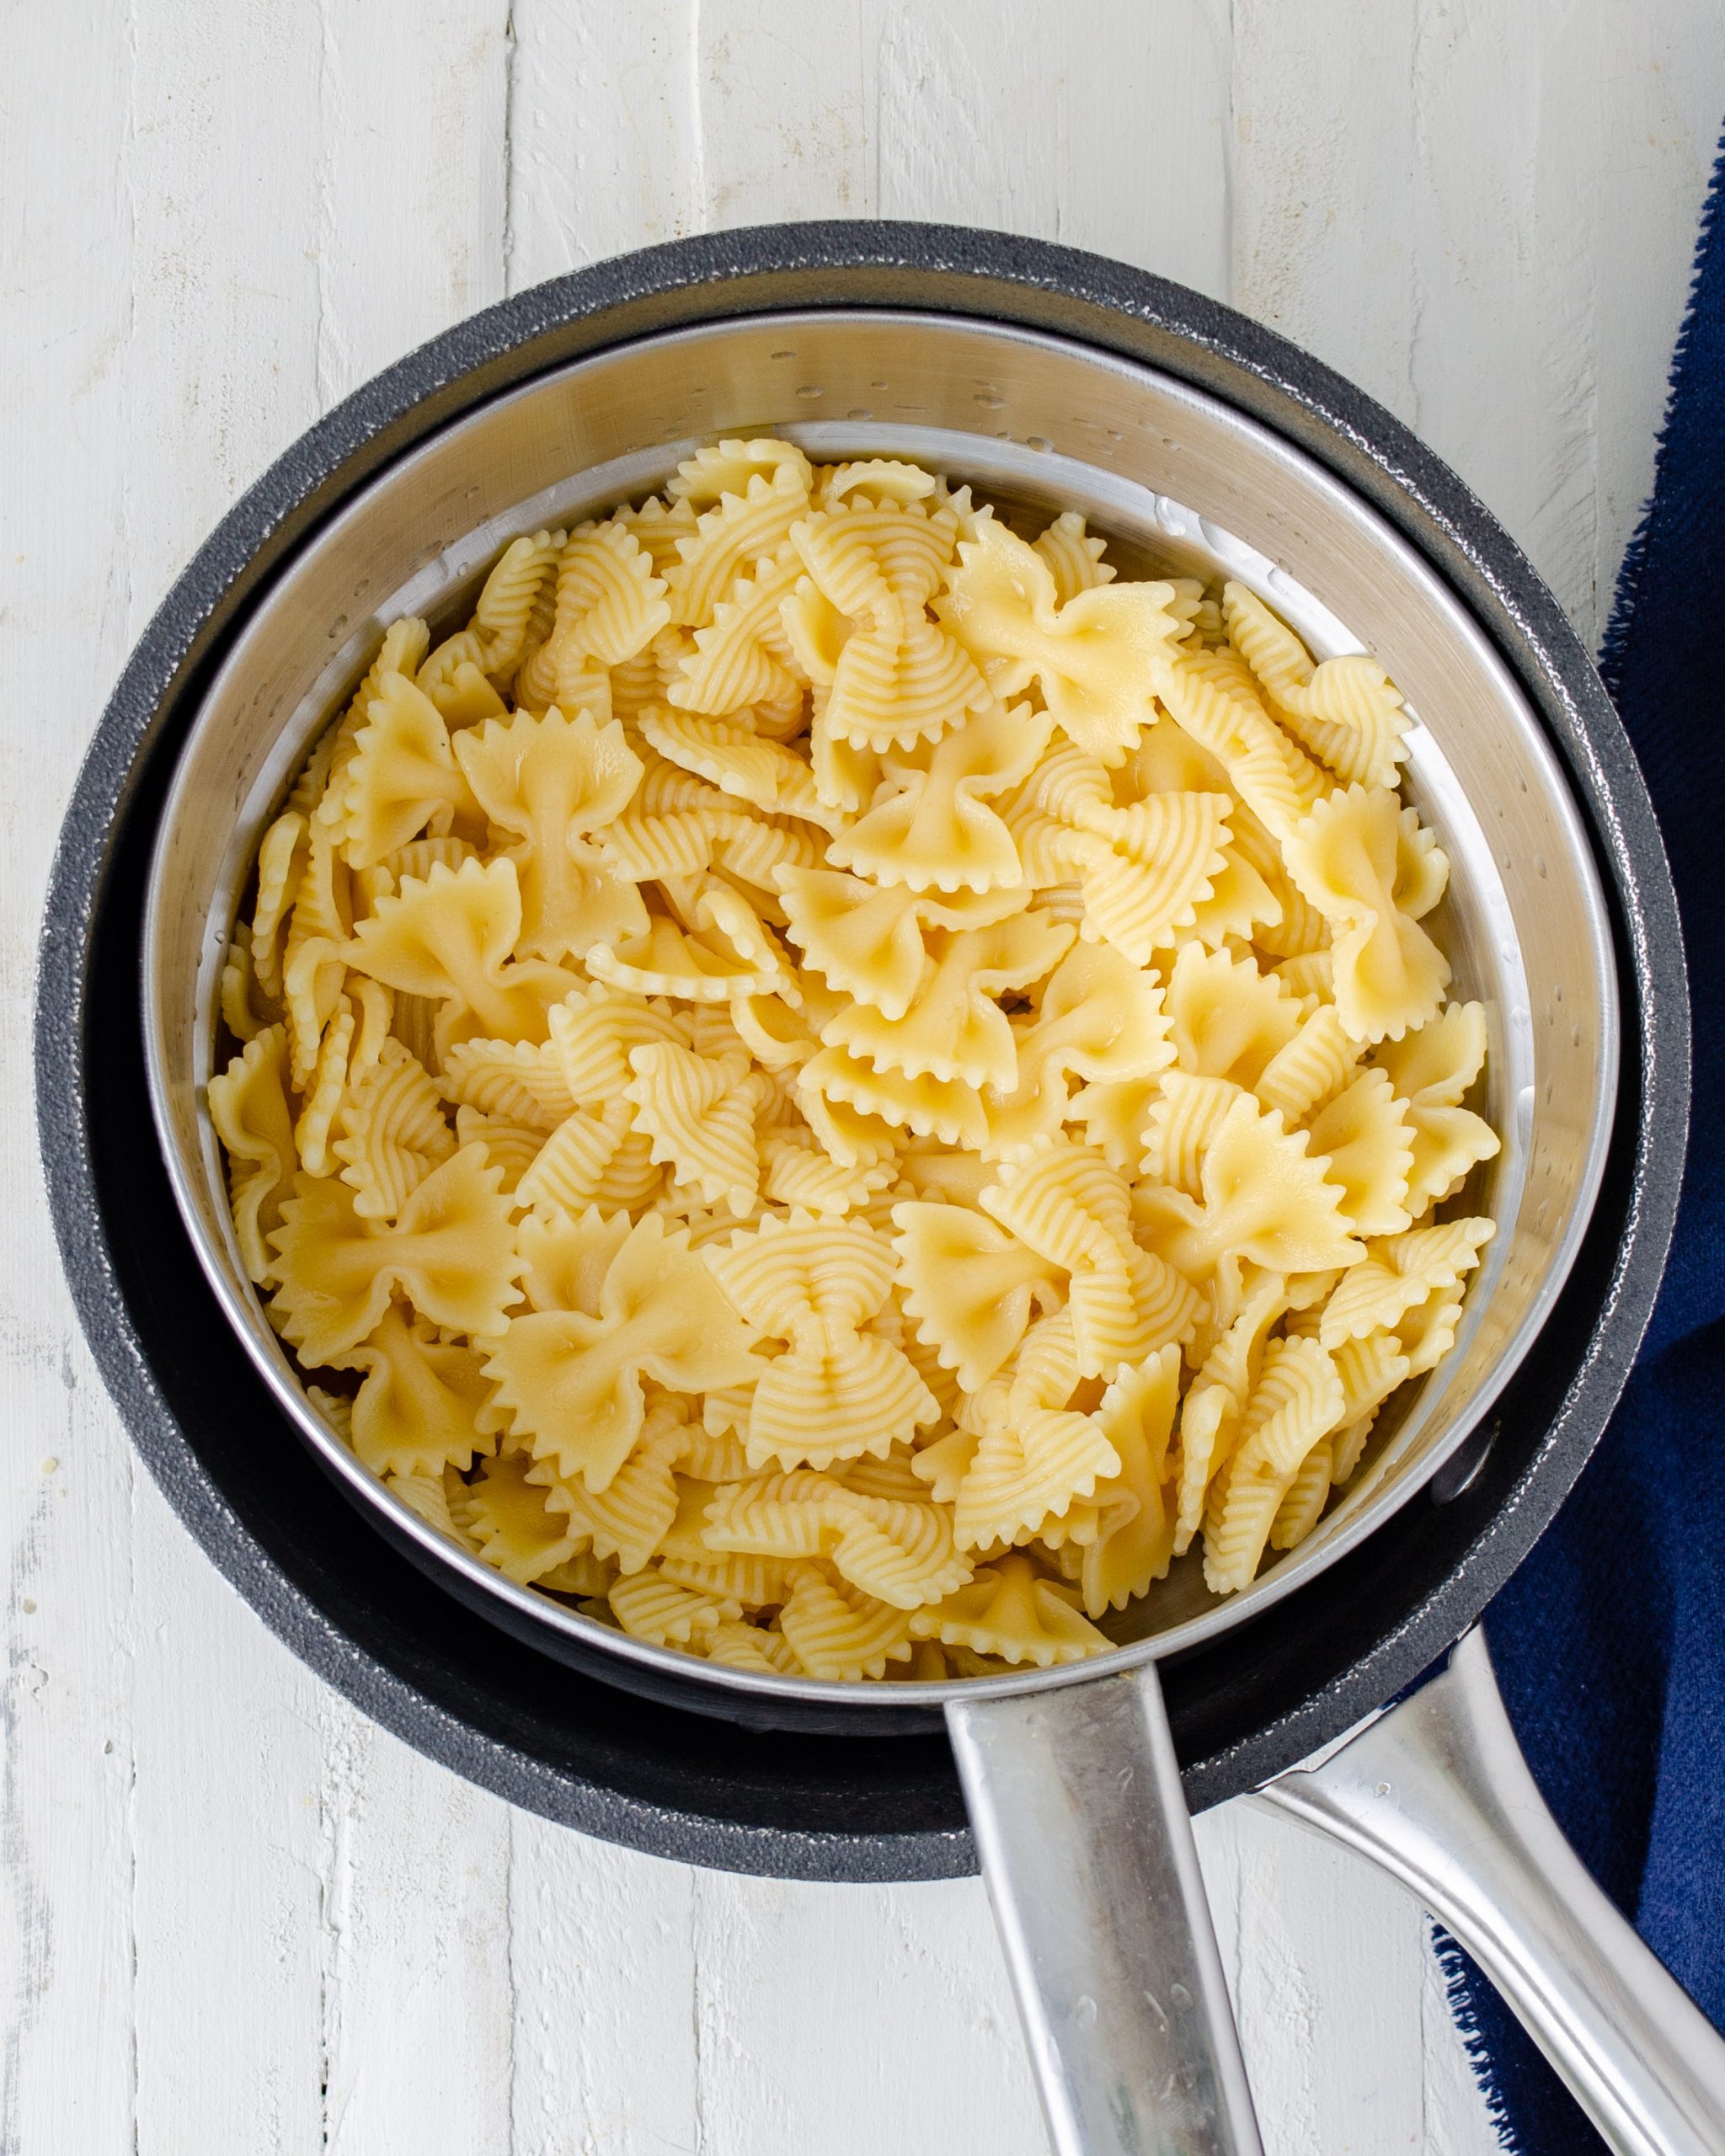 Boil the pasta according to your liking, rinse in cold water and drain. 